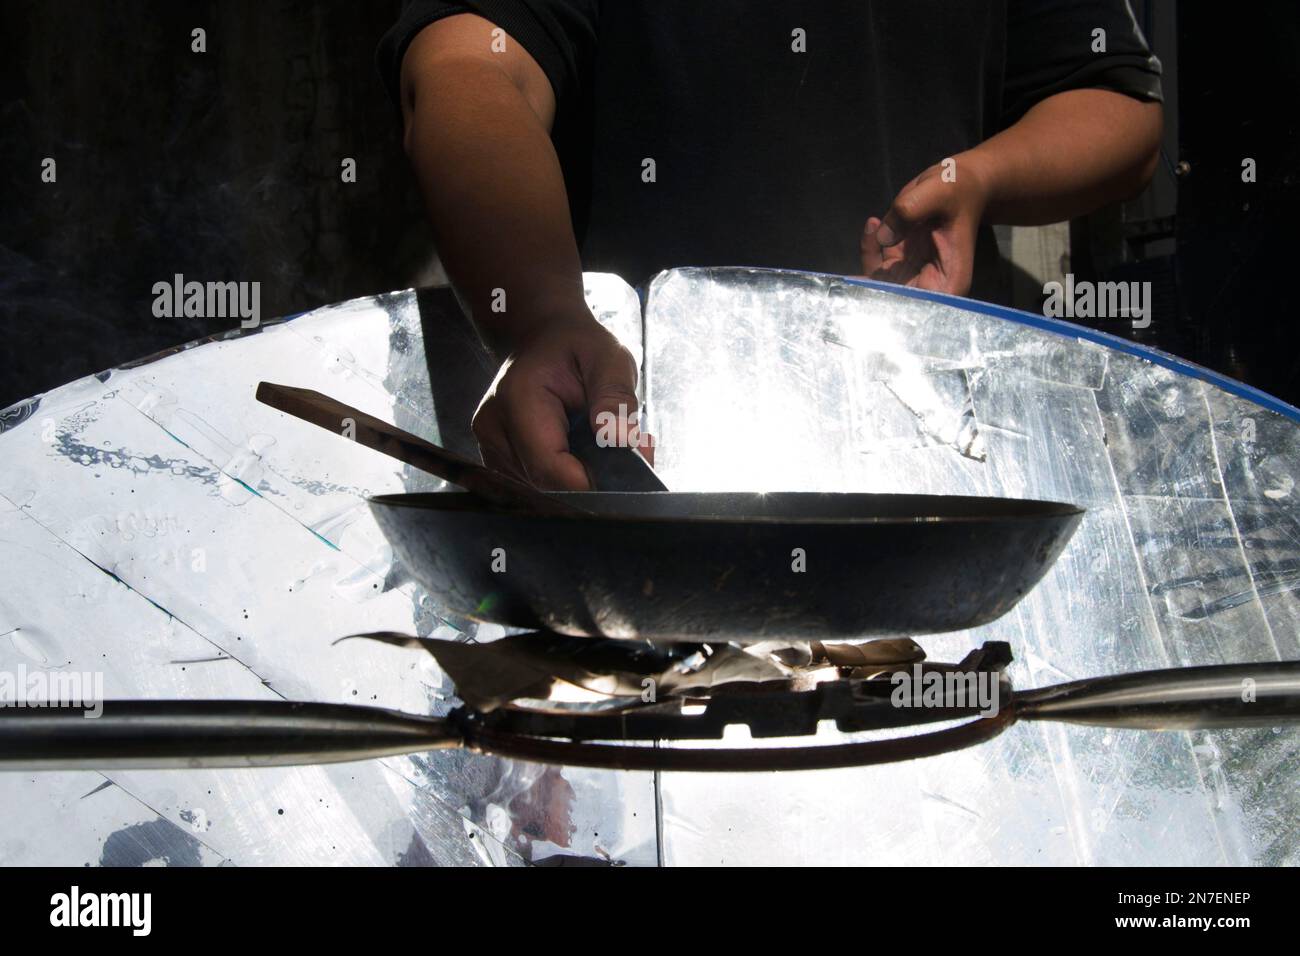 Ibrahim Rasyid, a student at the ITB School of Management Business is conducting showing a cooking using a stove that utilizes solar energy at his workshop in Bandung, West Java, Indonesia on 10 February 2023. Ibrahim Rasyid, is innovating to make a solar-powered stove. a stove that can produce heat energy by utilizing the reflection of sunlight. Mag Fire, thus the name of this solar stove, is made from recycled iron, aluminum foil and parabolic waste, making it more environmentally friendly and affordable by up to 50 percent of conventional stoves. (Photo by Dimas Rachmatsyah/INA Photo Agenc Stock Photo